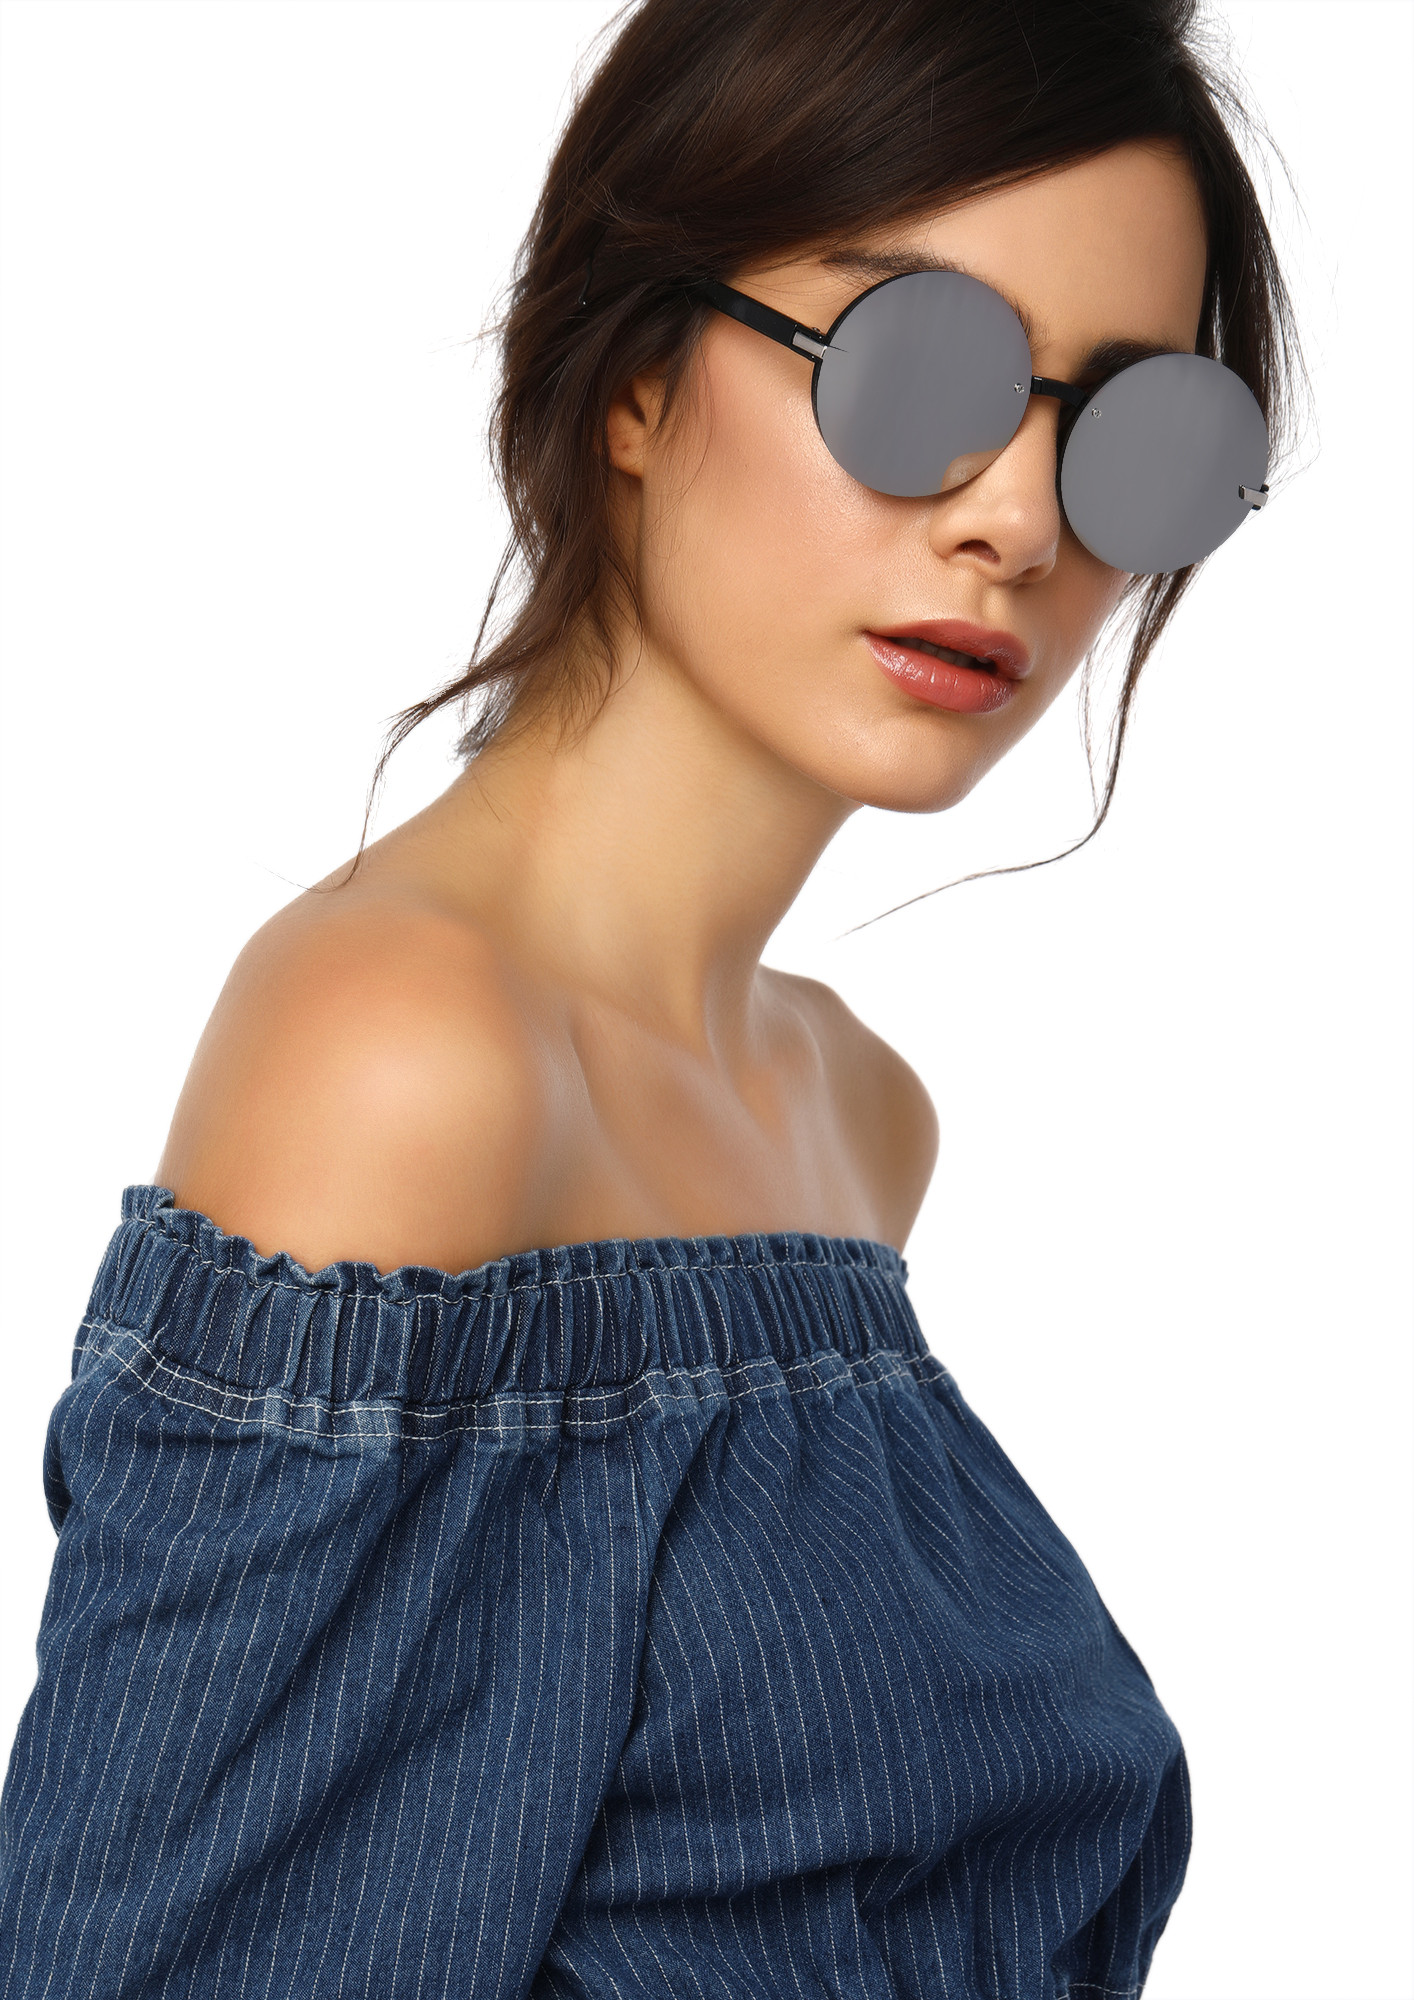 TAKING BACK A STEP SILVER ROUND SUNGLASSES